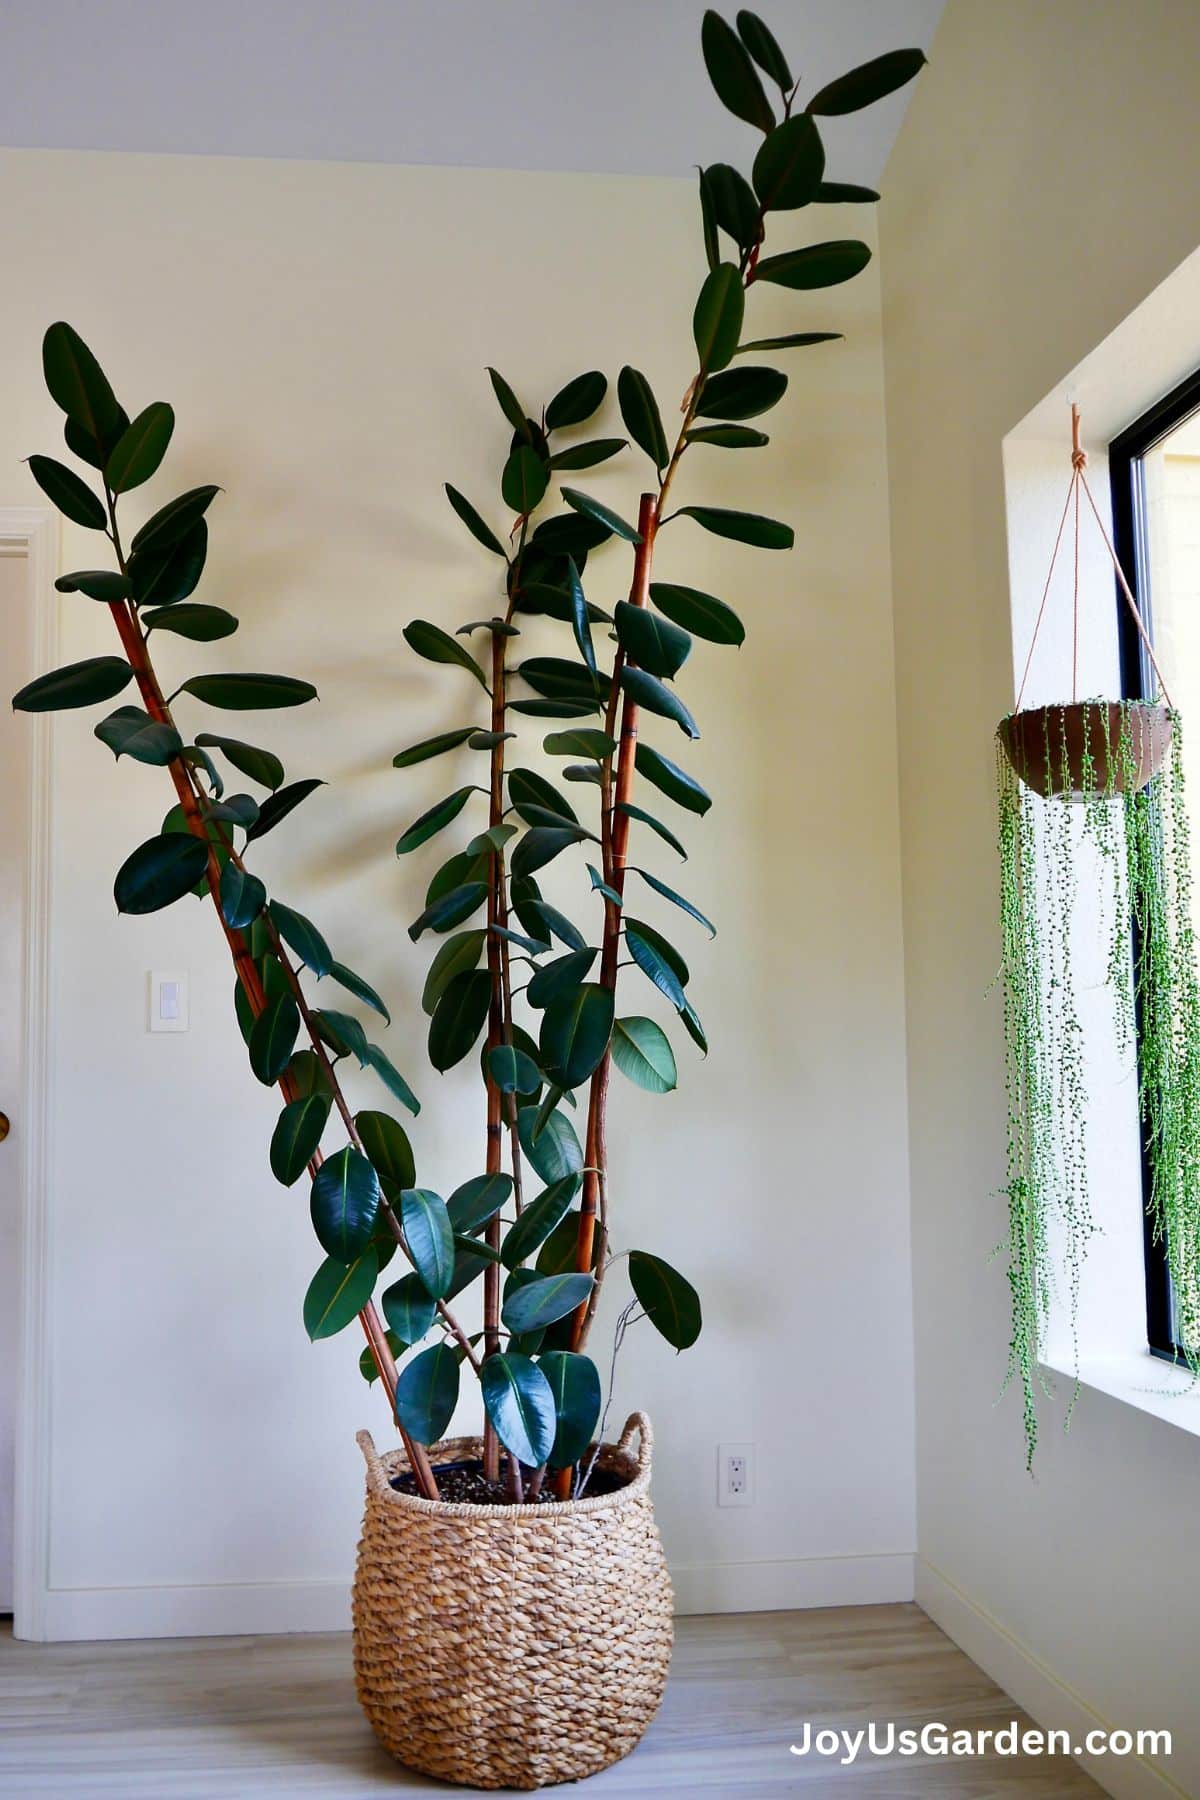 Large rubber tree plant grows indoors in a plant basket next to a window with a hanging string of pearls plant.